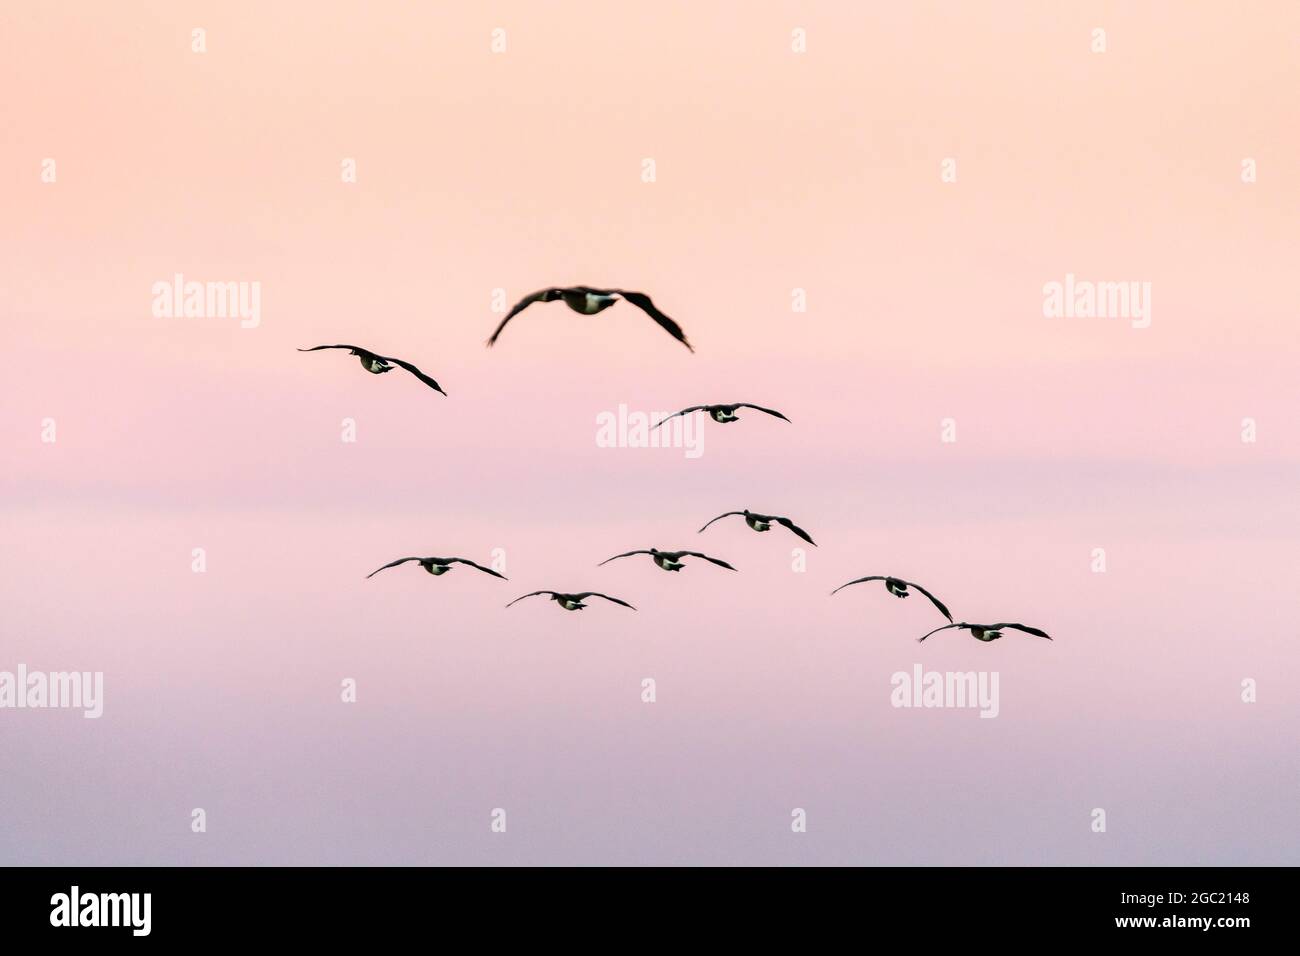 Canada geese flying in the sky at sunset Stock Photo